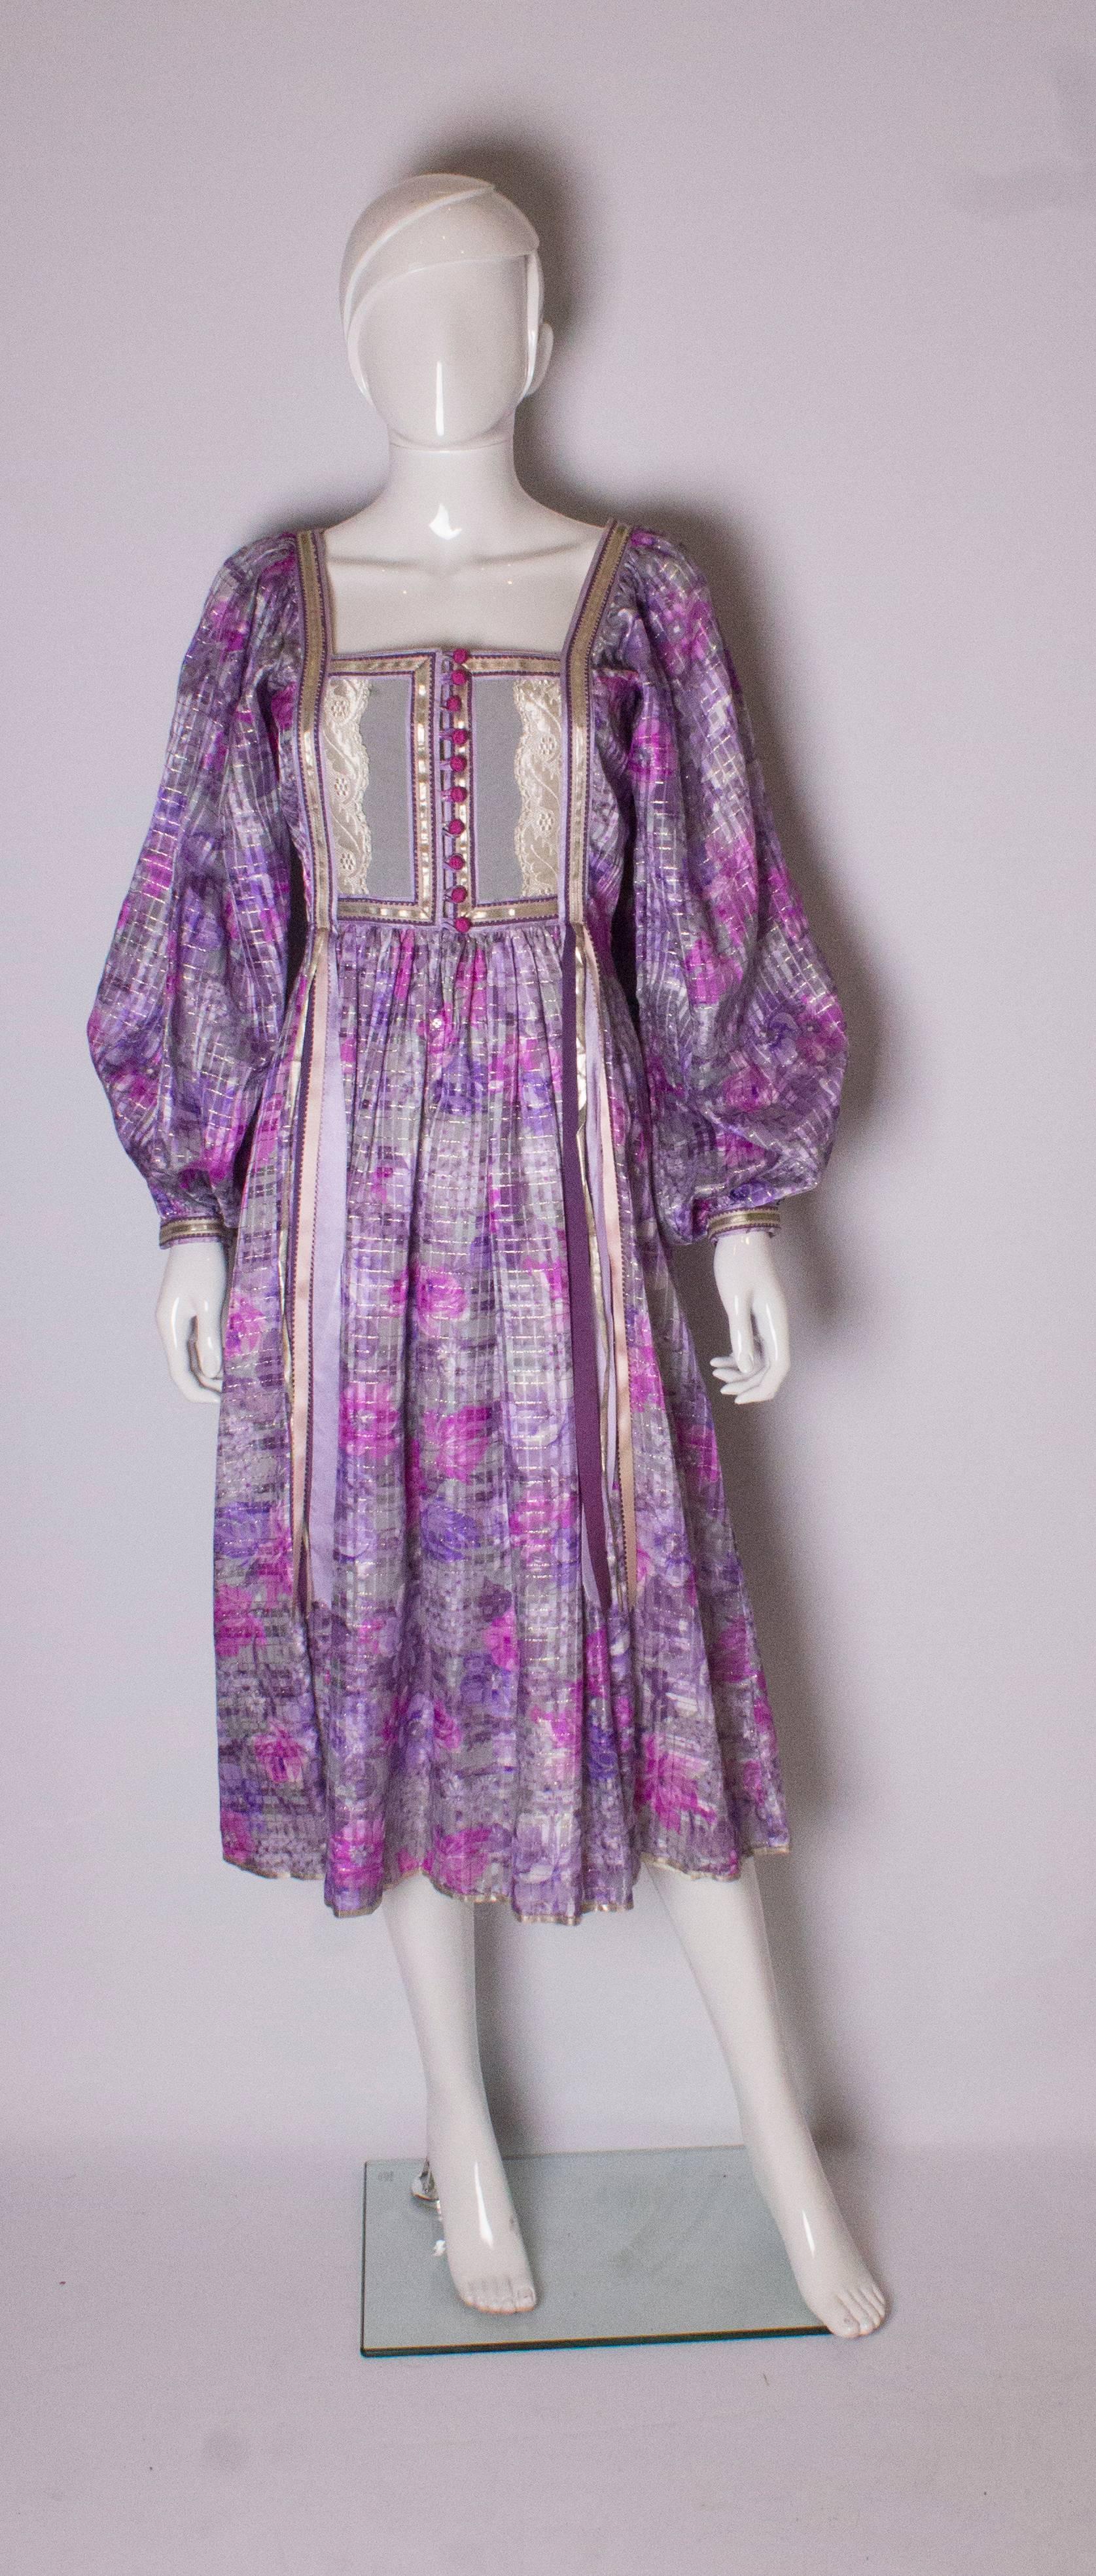 A pretty dress by Rumak, in a lilac and grey silk chiffon with gold thread running through.
The  dress has a square neckline at the front and back with ribbon detail, and puff sleeves.